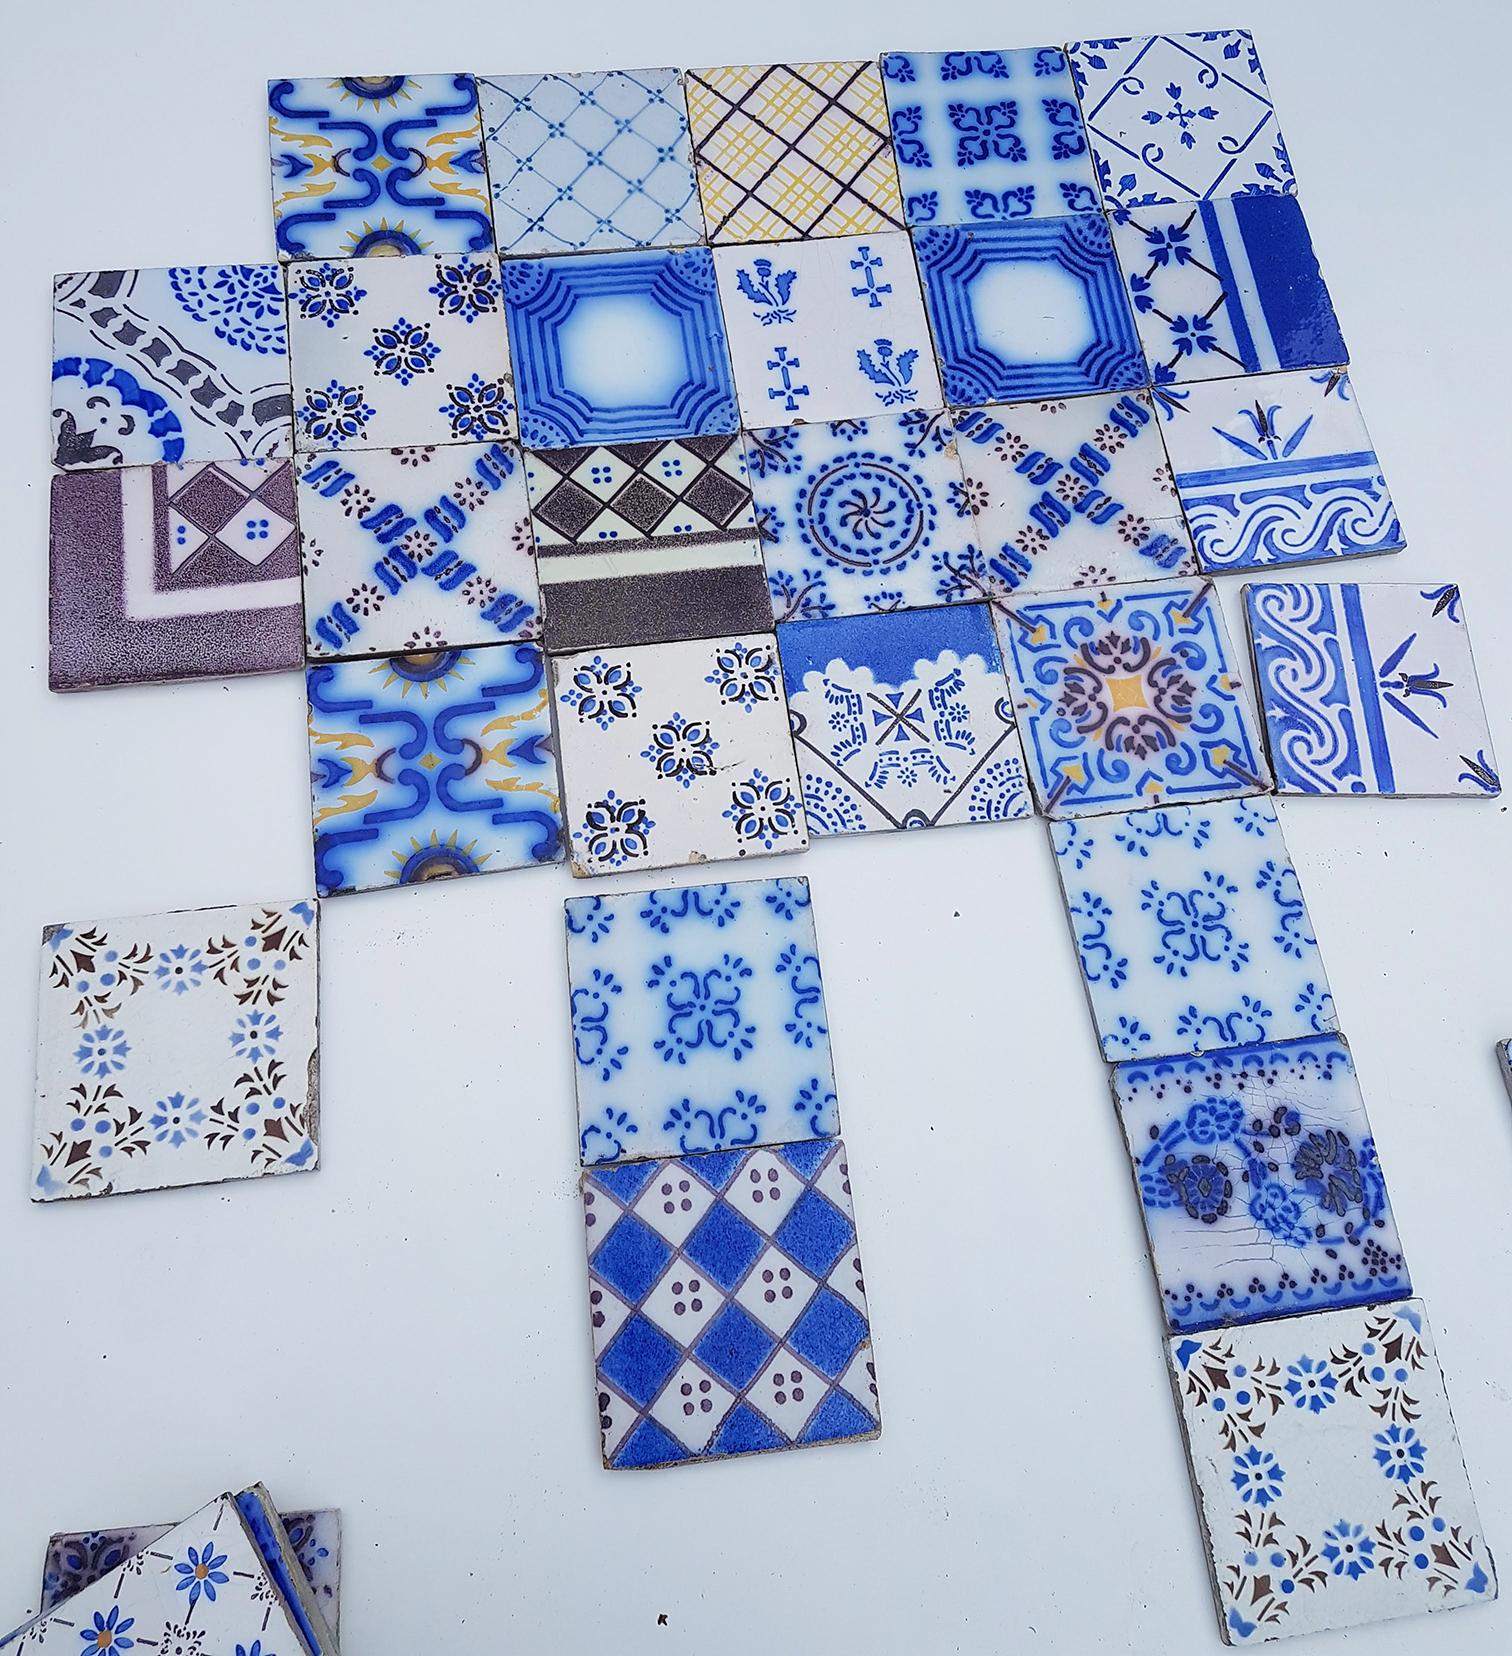 This is an amazing and unique set of 64 antique French handmade ceramic tiles. Manufactured Pas de Calais Desvres, circa 1910s. With different stylized designs. These tiles would be charming displayed on easels, framed or incorporated into a custom